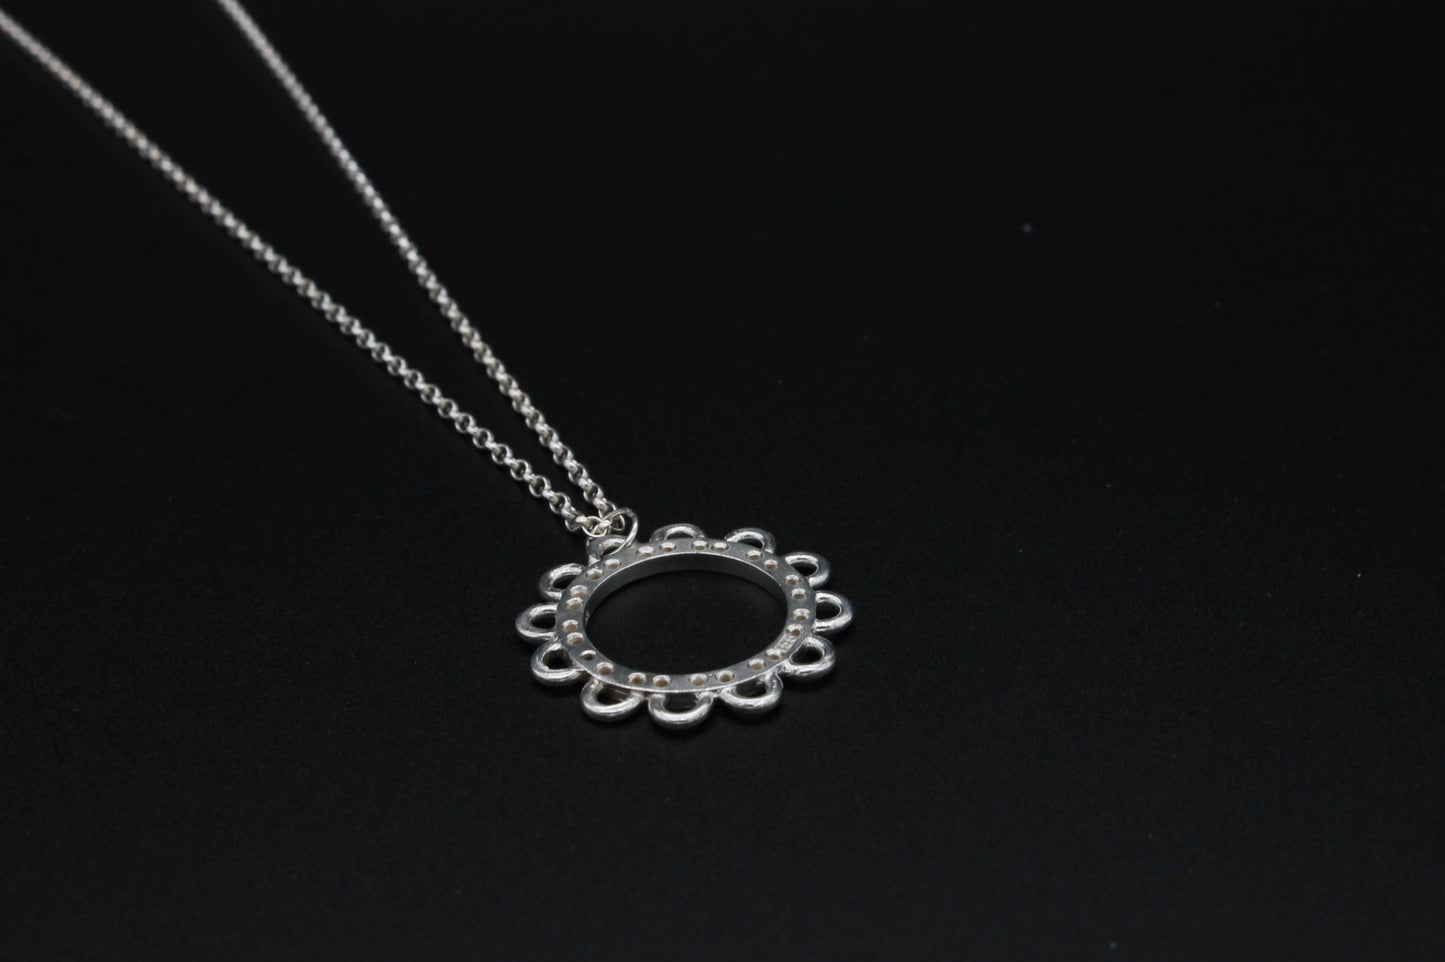 Limerick Lace Inspired Silver by Marianne Kenny